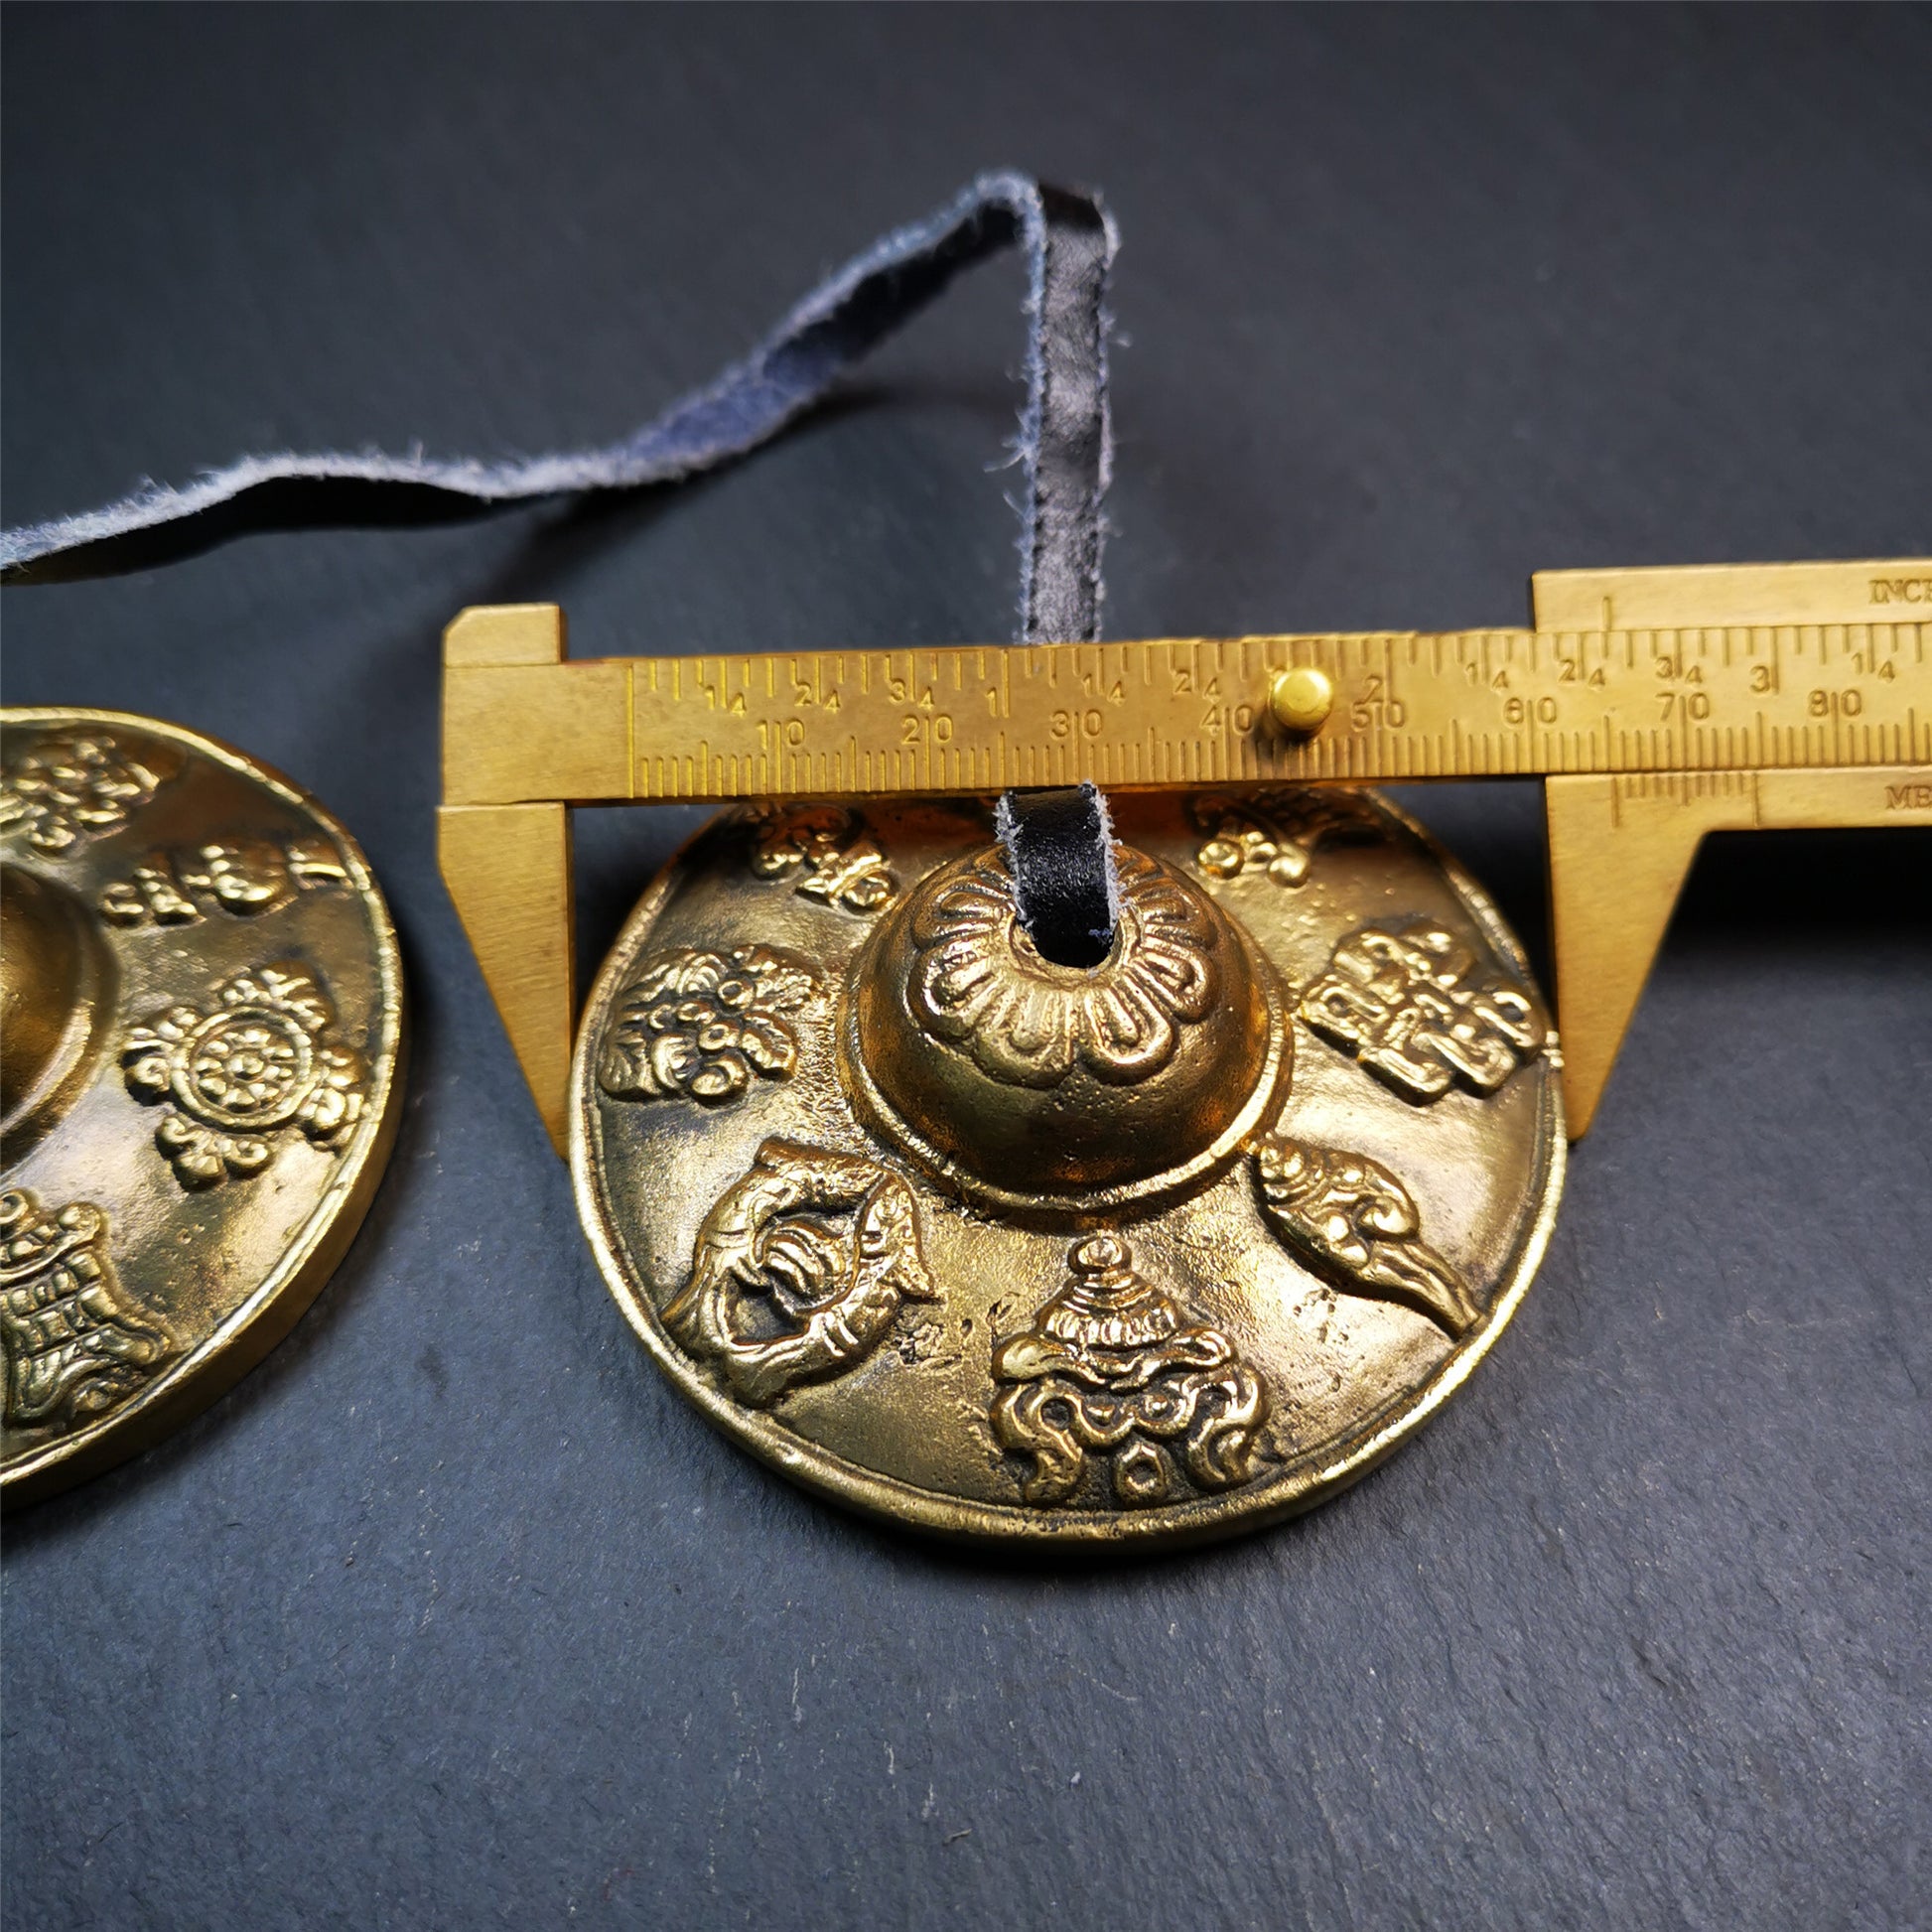 This tingsha bell set was handmade in Nepal,using traditional techniques and materials. It was made of brass,carved astamangal pattern,6.5cm diameter,with pure, clear and resonant,good for meditation. Come with tingsha case.